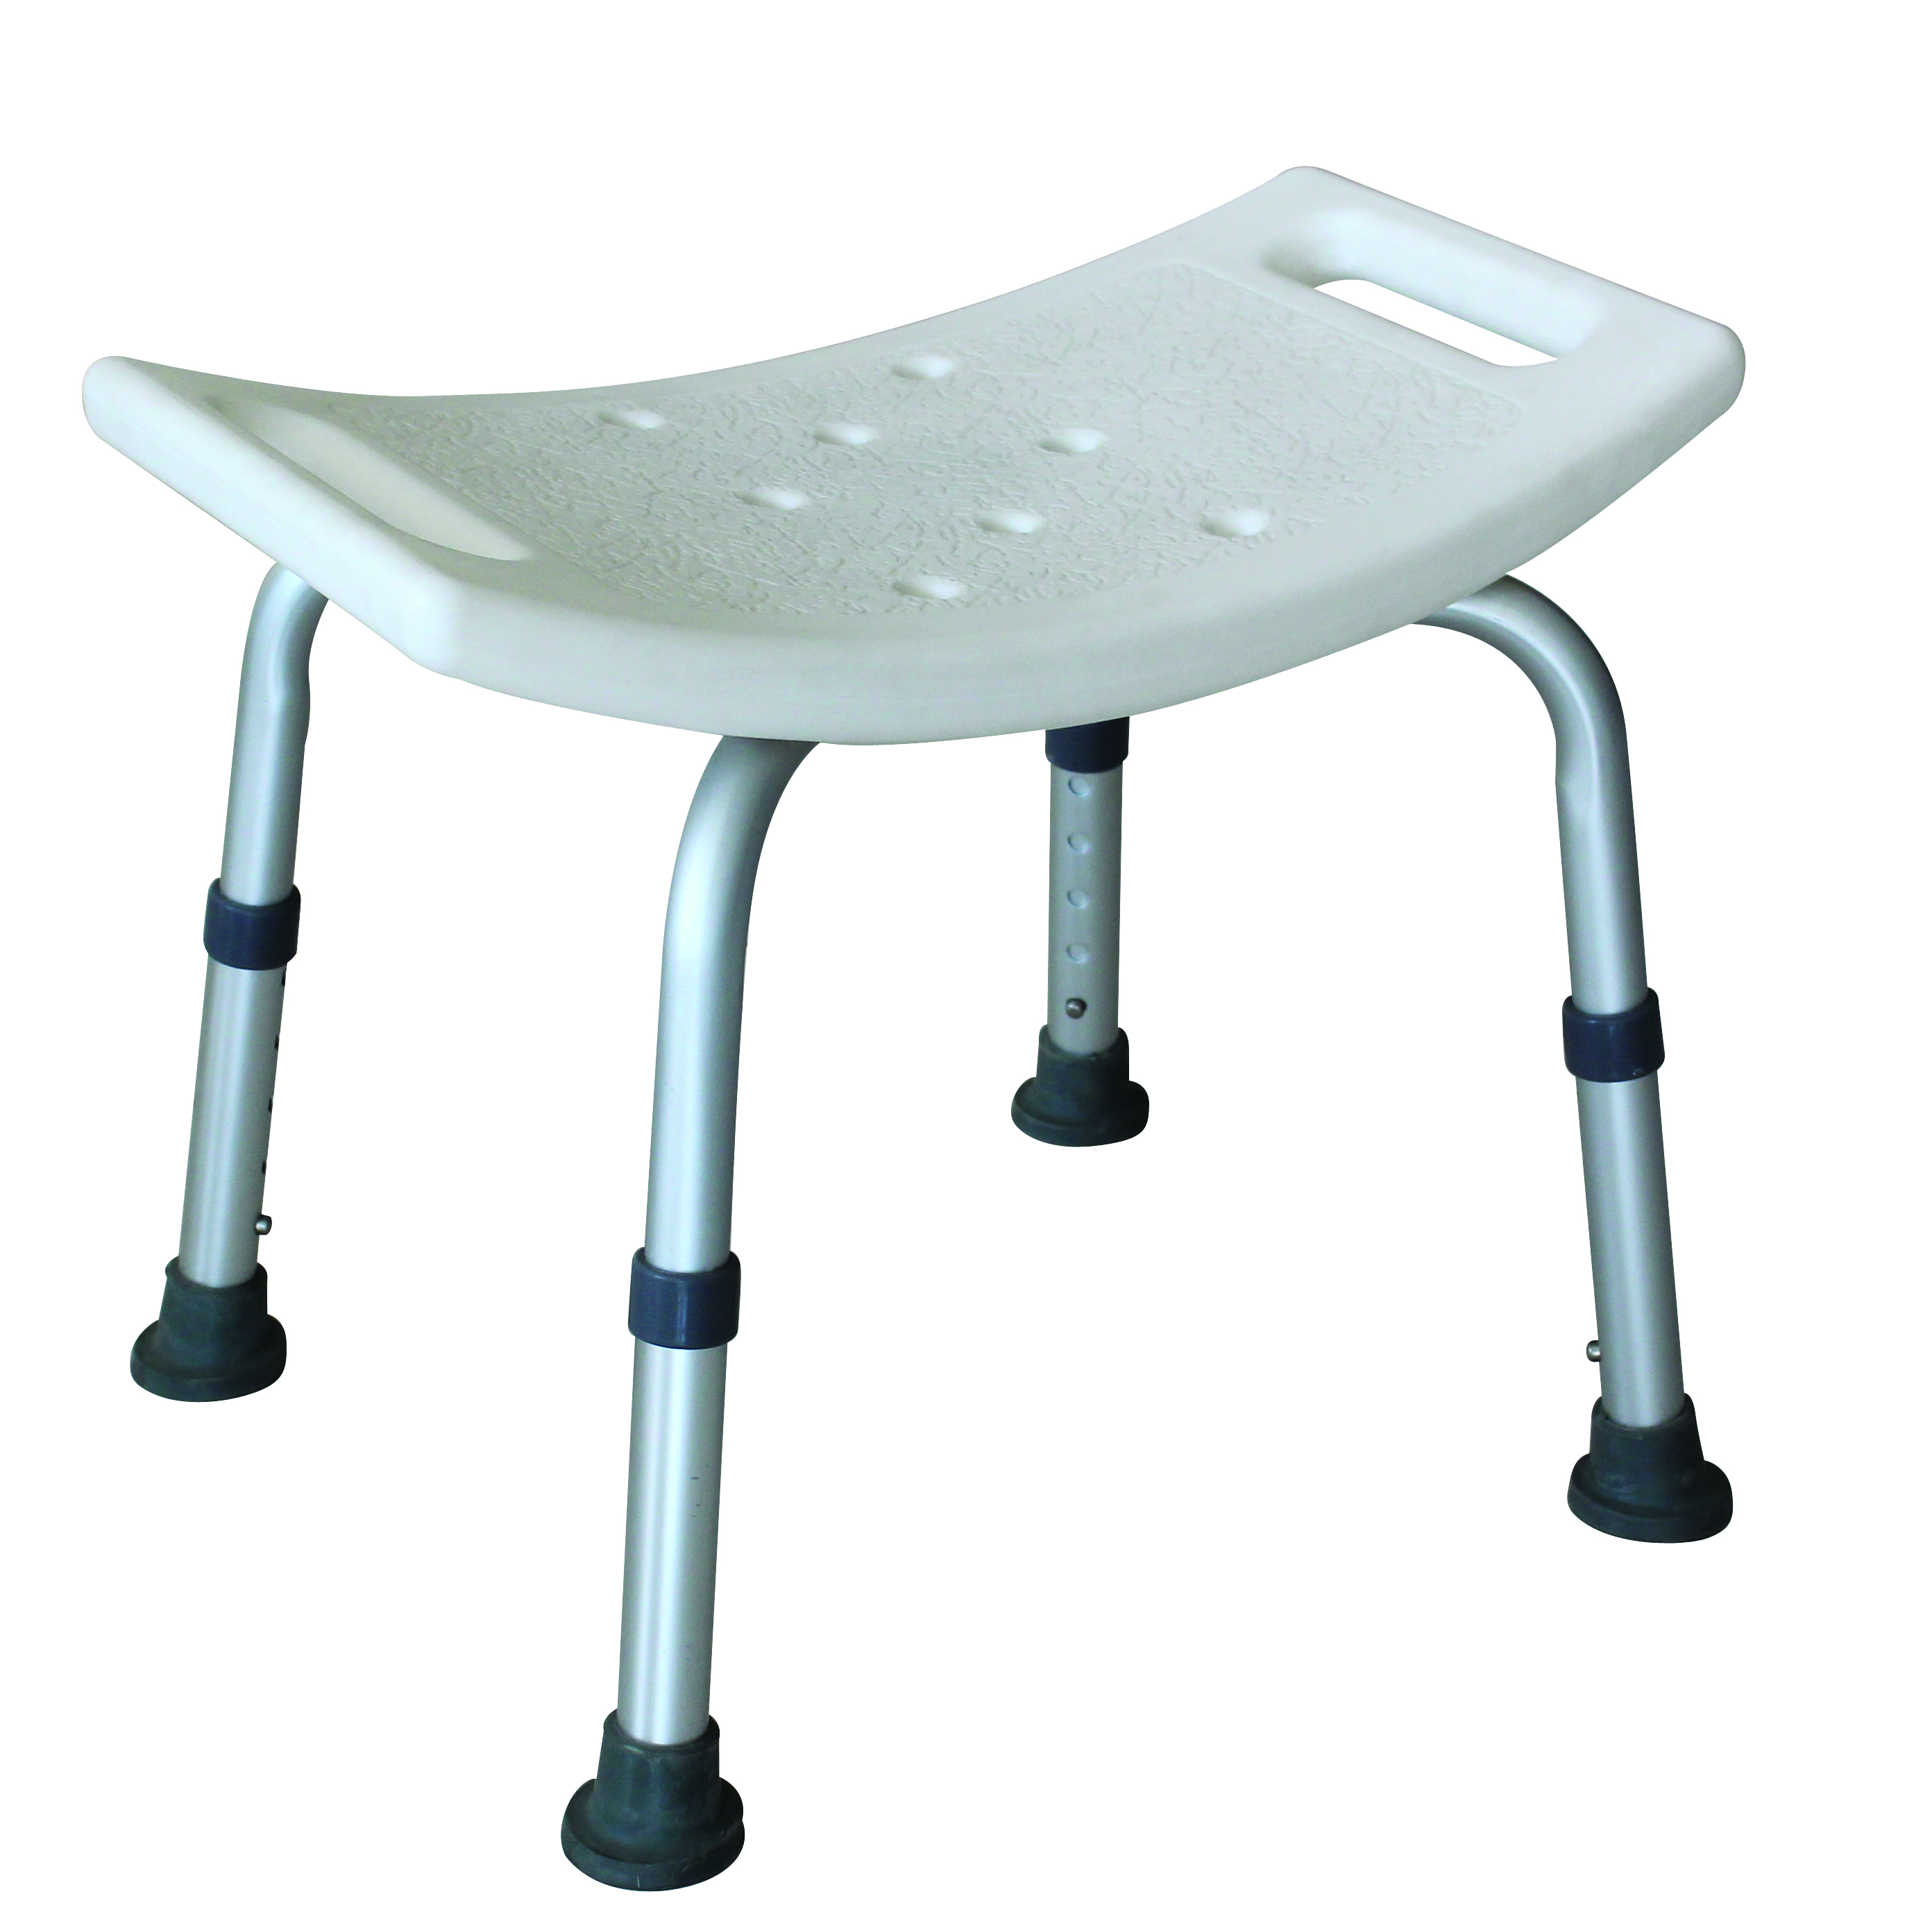 BAT-02 Romed aluminium bath chair, without backrest, dripping holes with anti skidding pad, per piece in a carton.